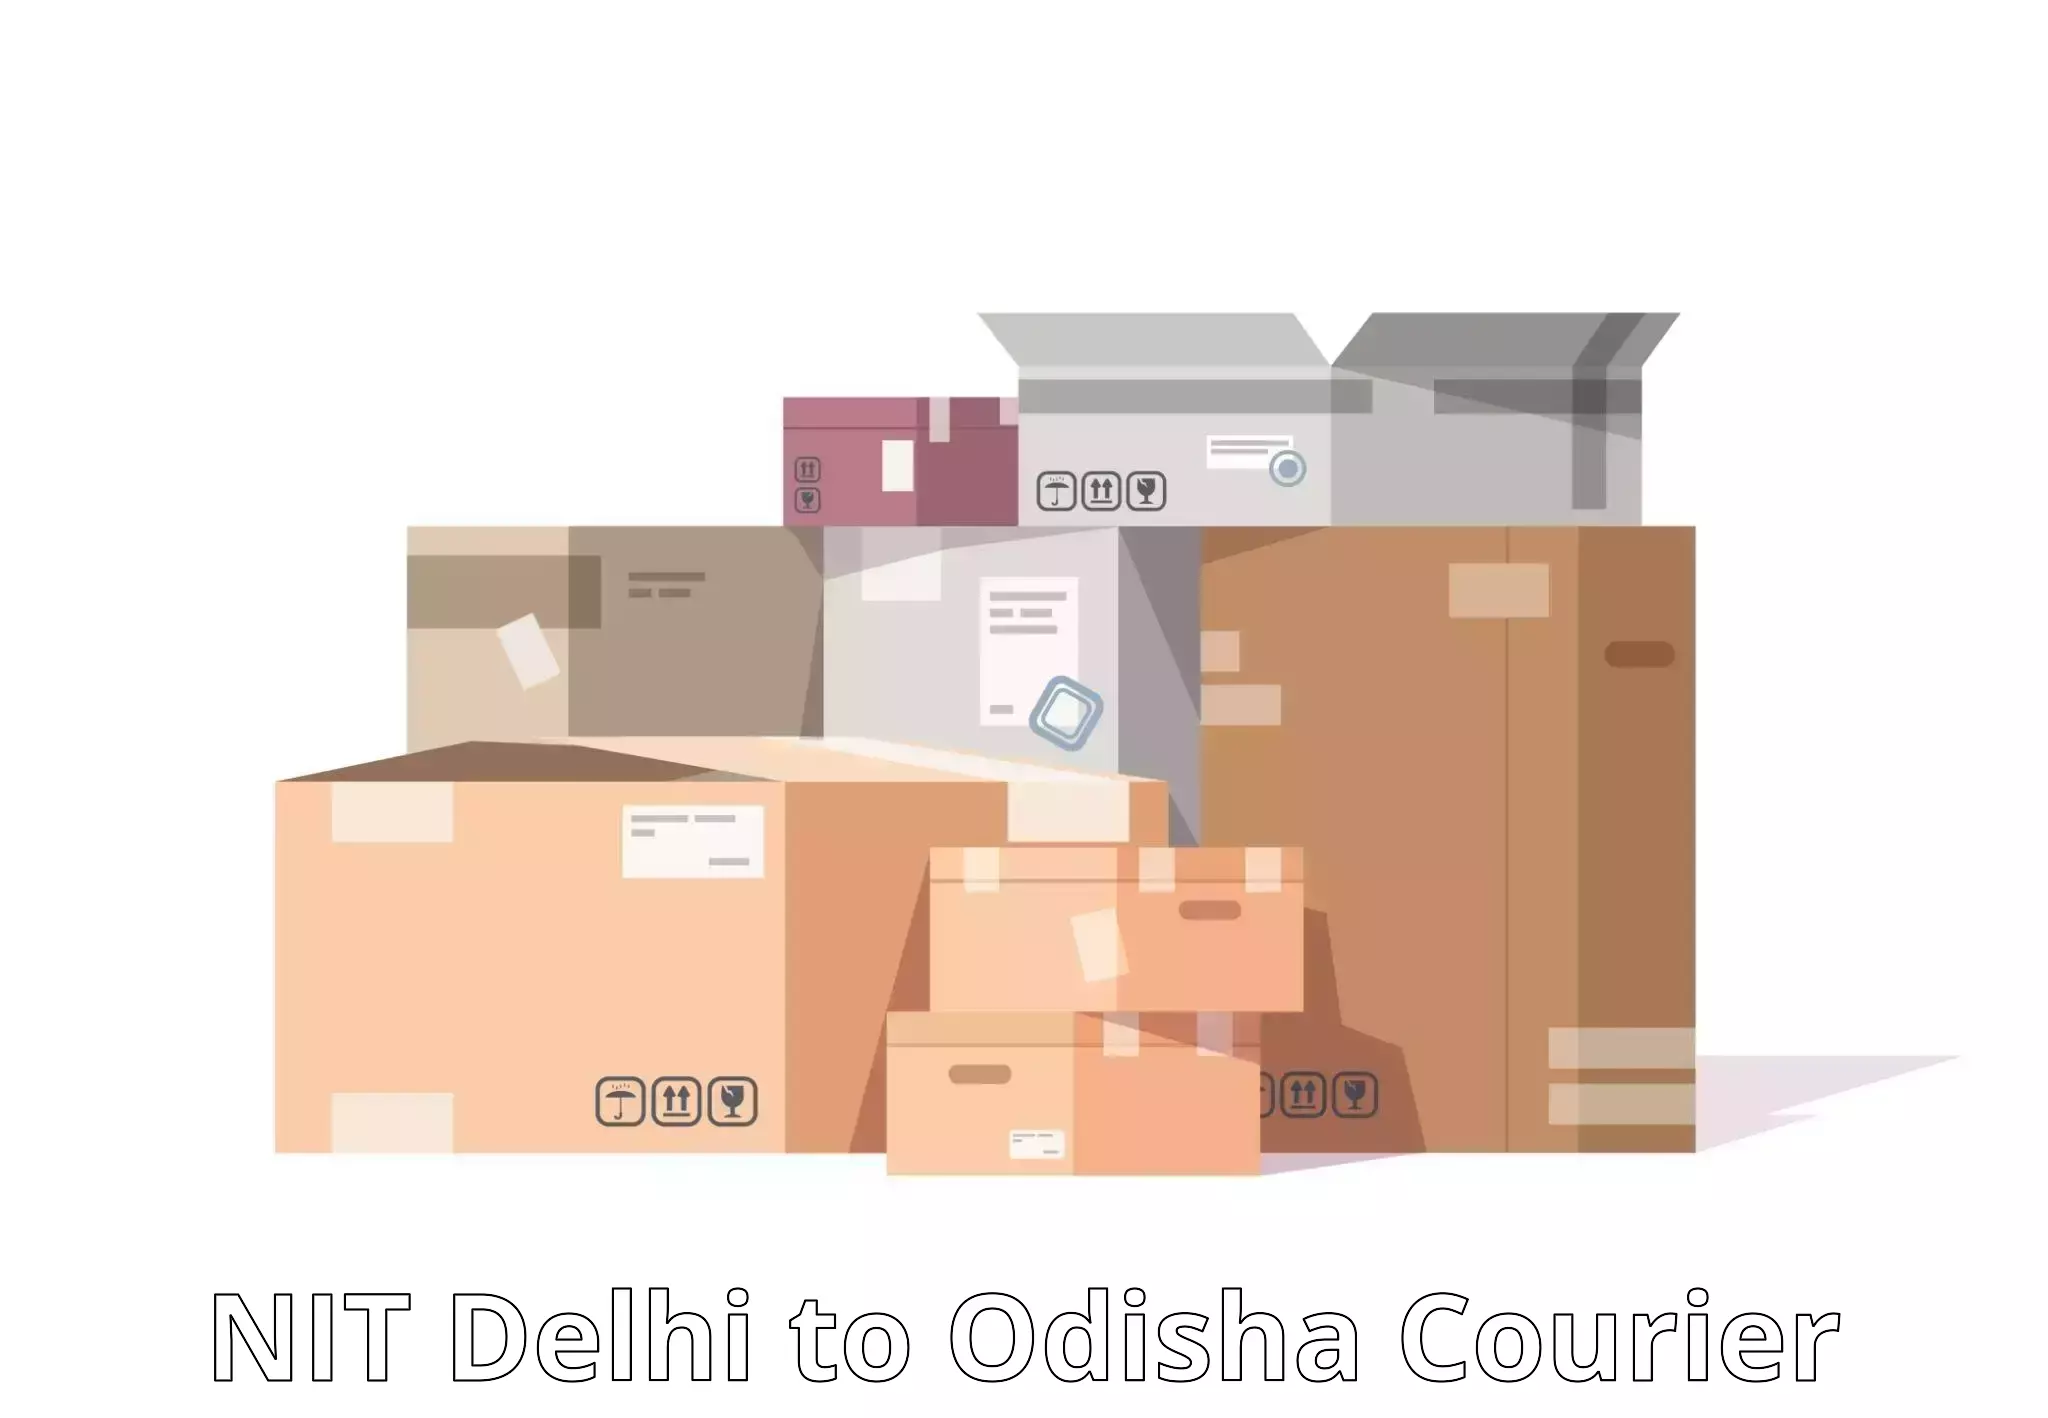 State-of-the-art courier technology NIT Delhi to Delang